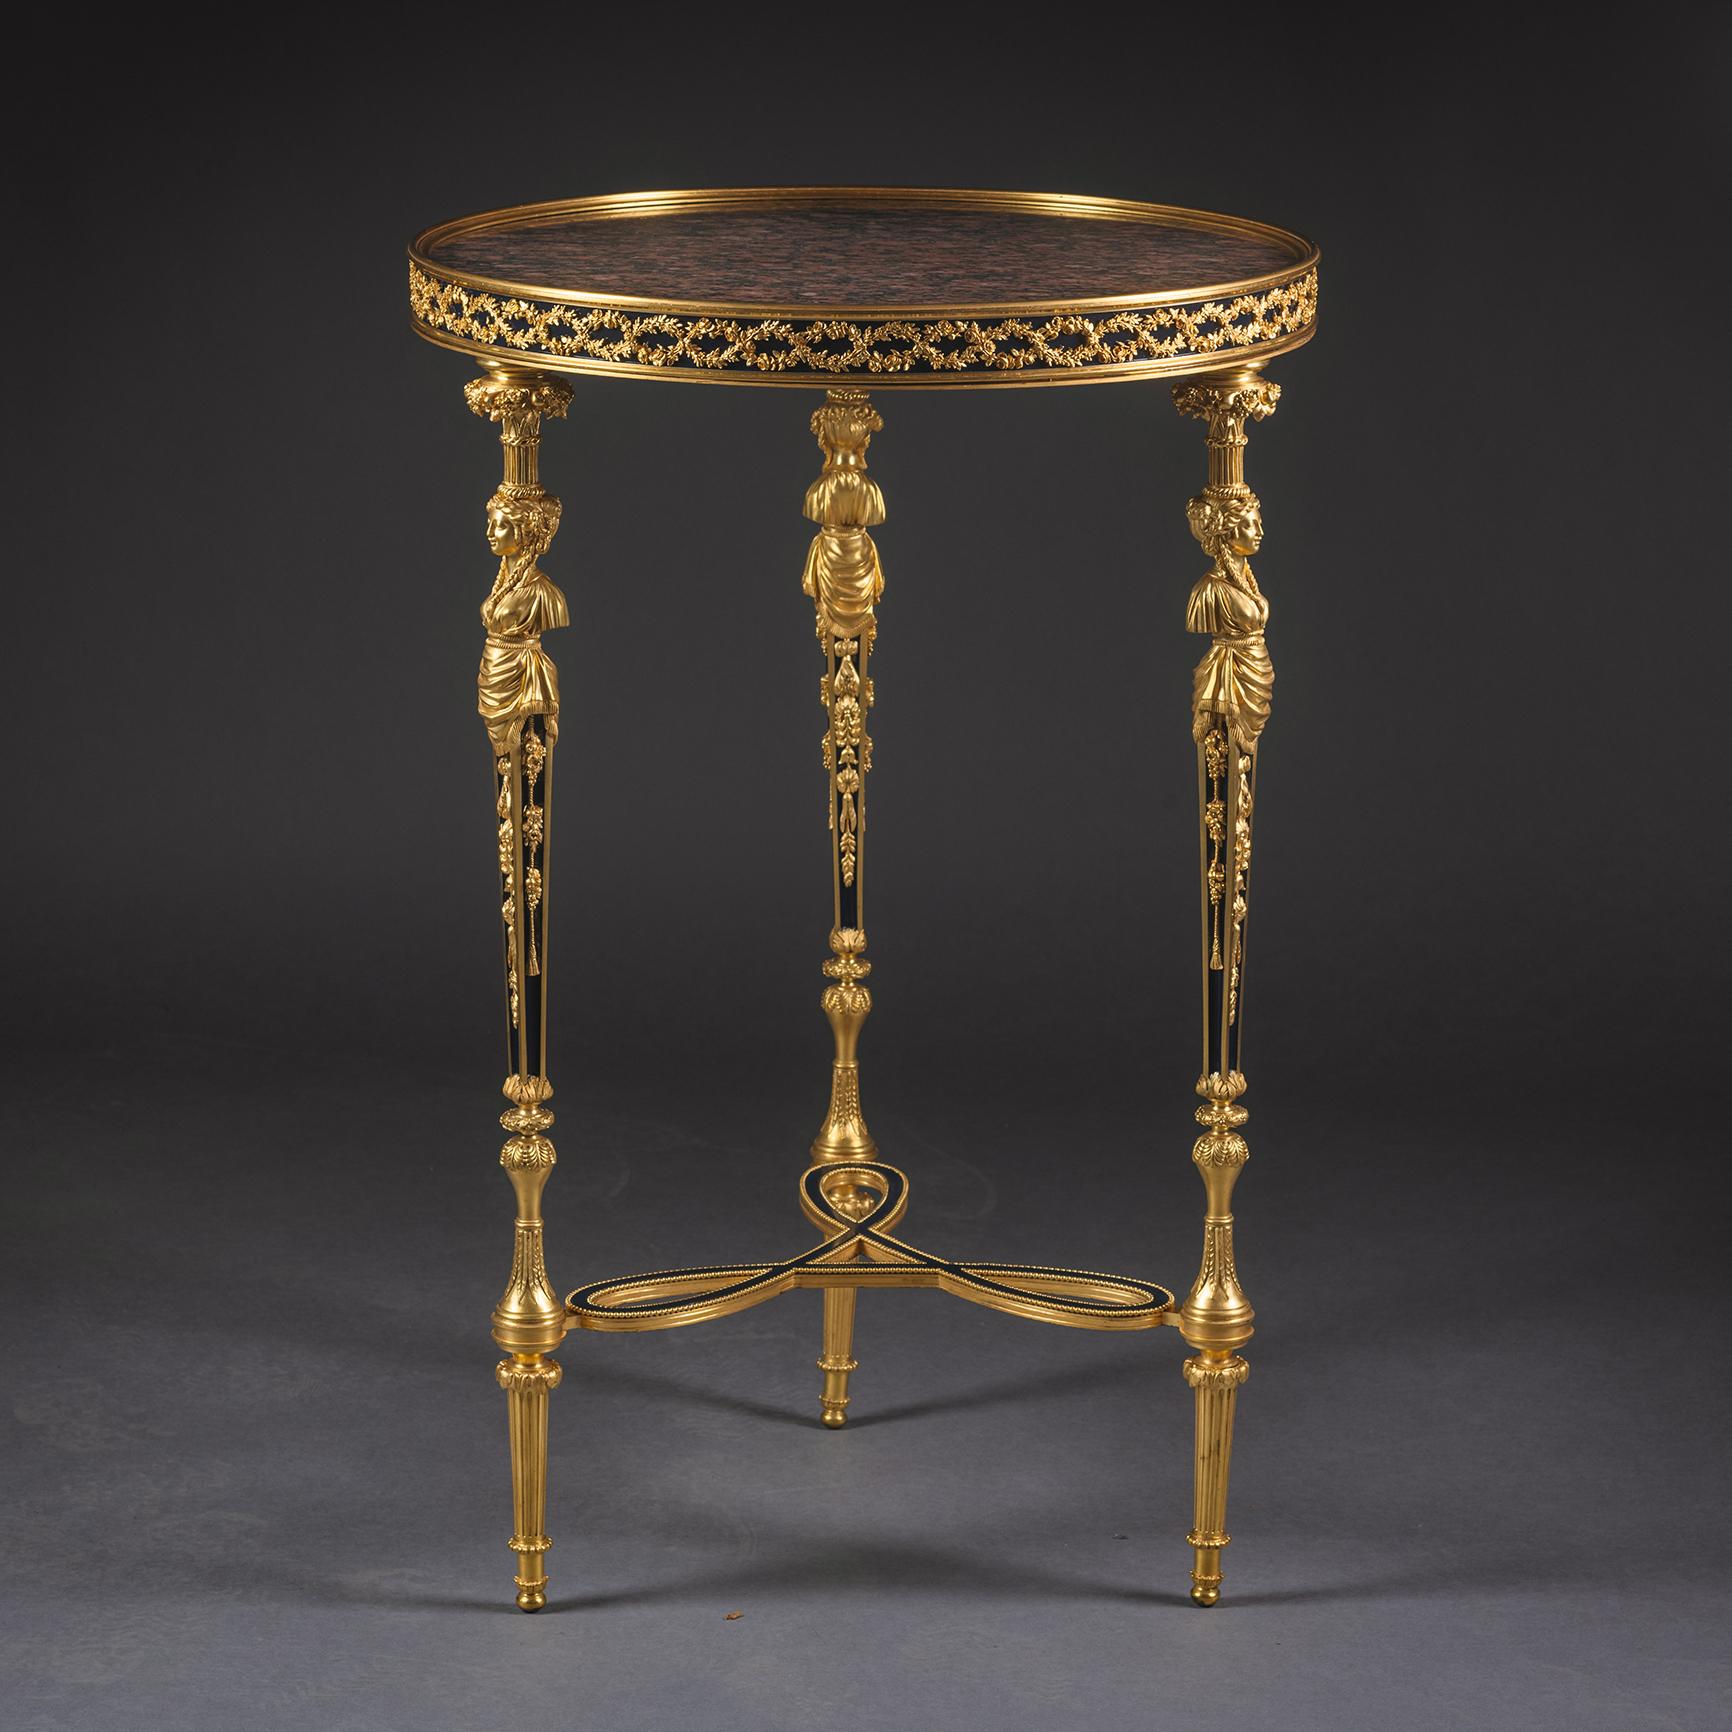 A Fine Louis XVI Style gilt-bronze Gueridon in the manner of Adam Weisweiler.

This fine gueridon has a rouge granite circular top above a laurel and rose cast frieze raised on four tapering legs headed by finely cast gilt-bronze female caryatids,